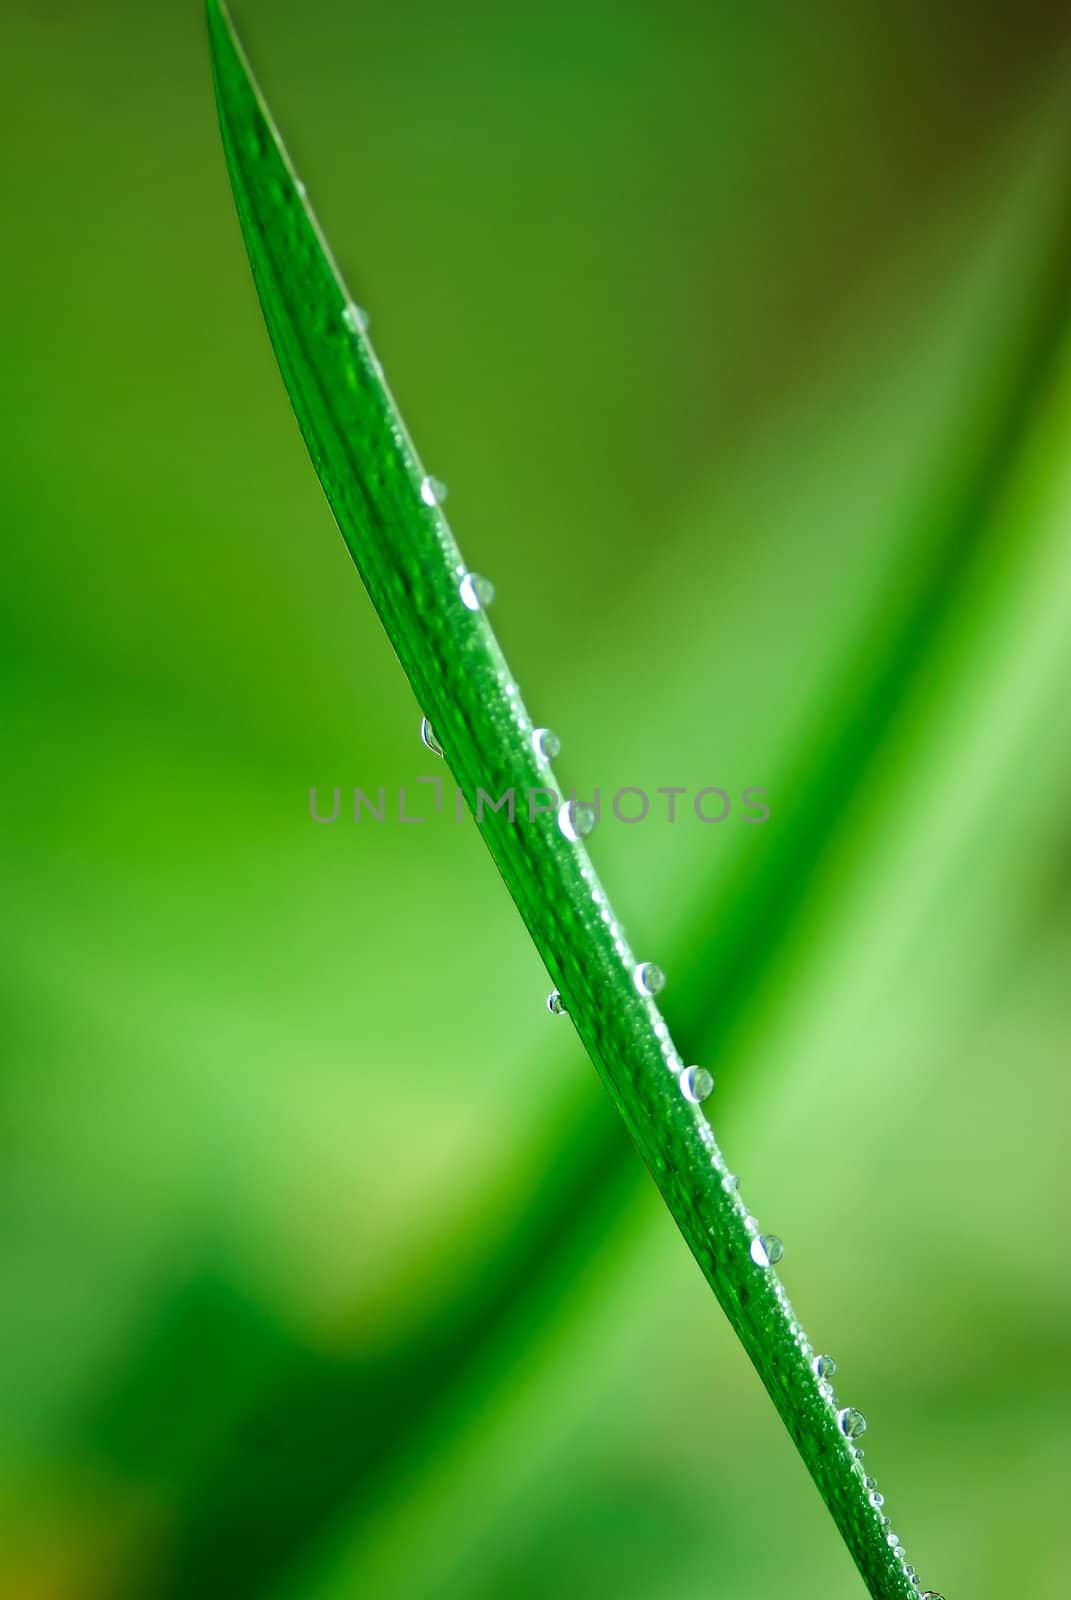 The grass after the rain by xfdly5